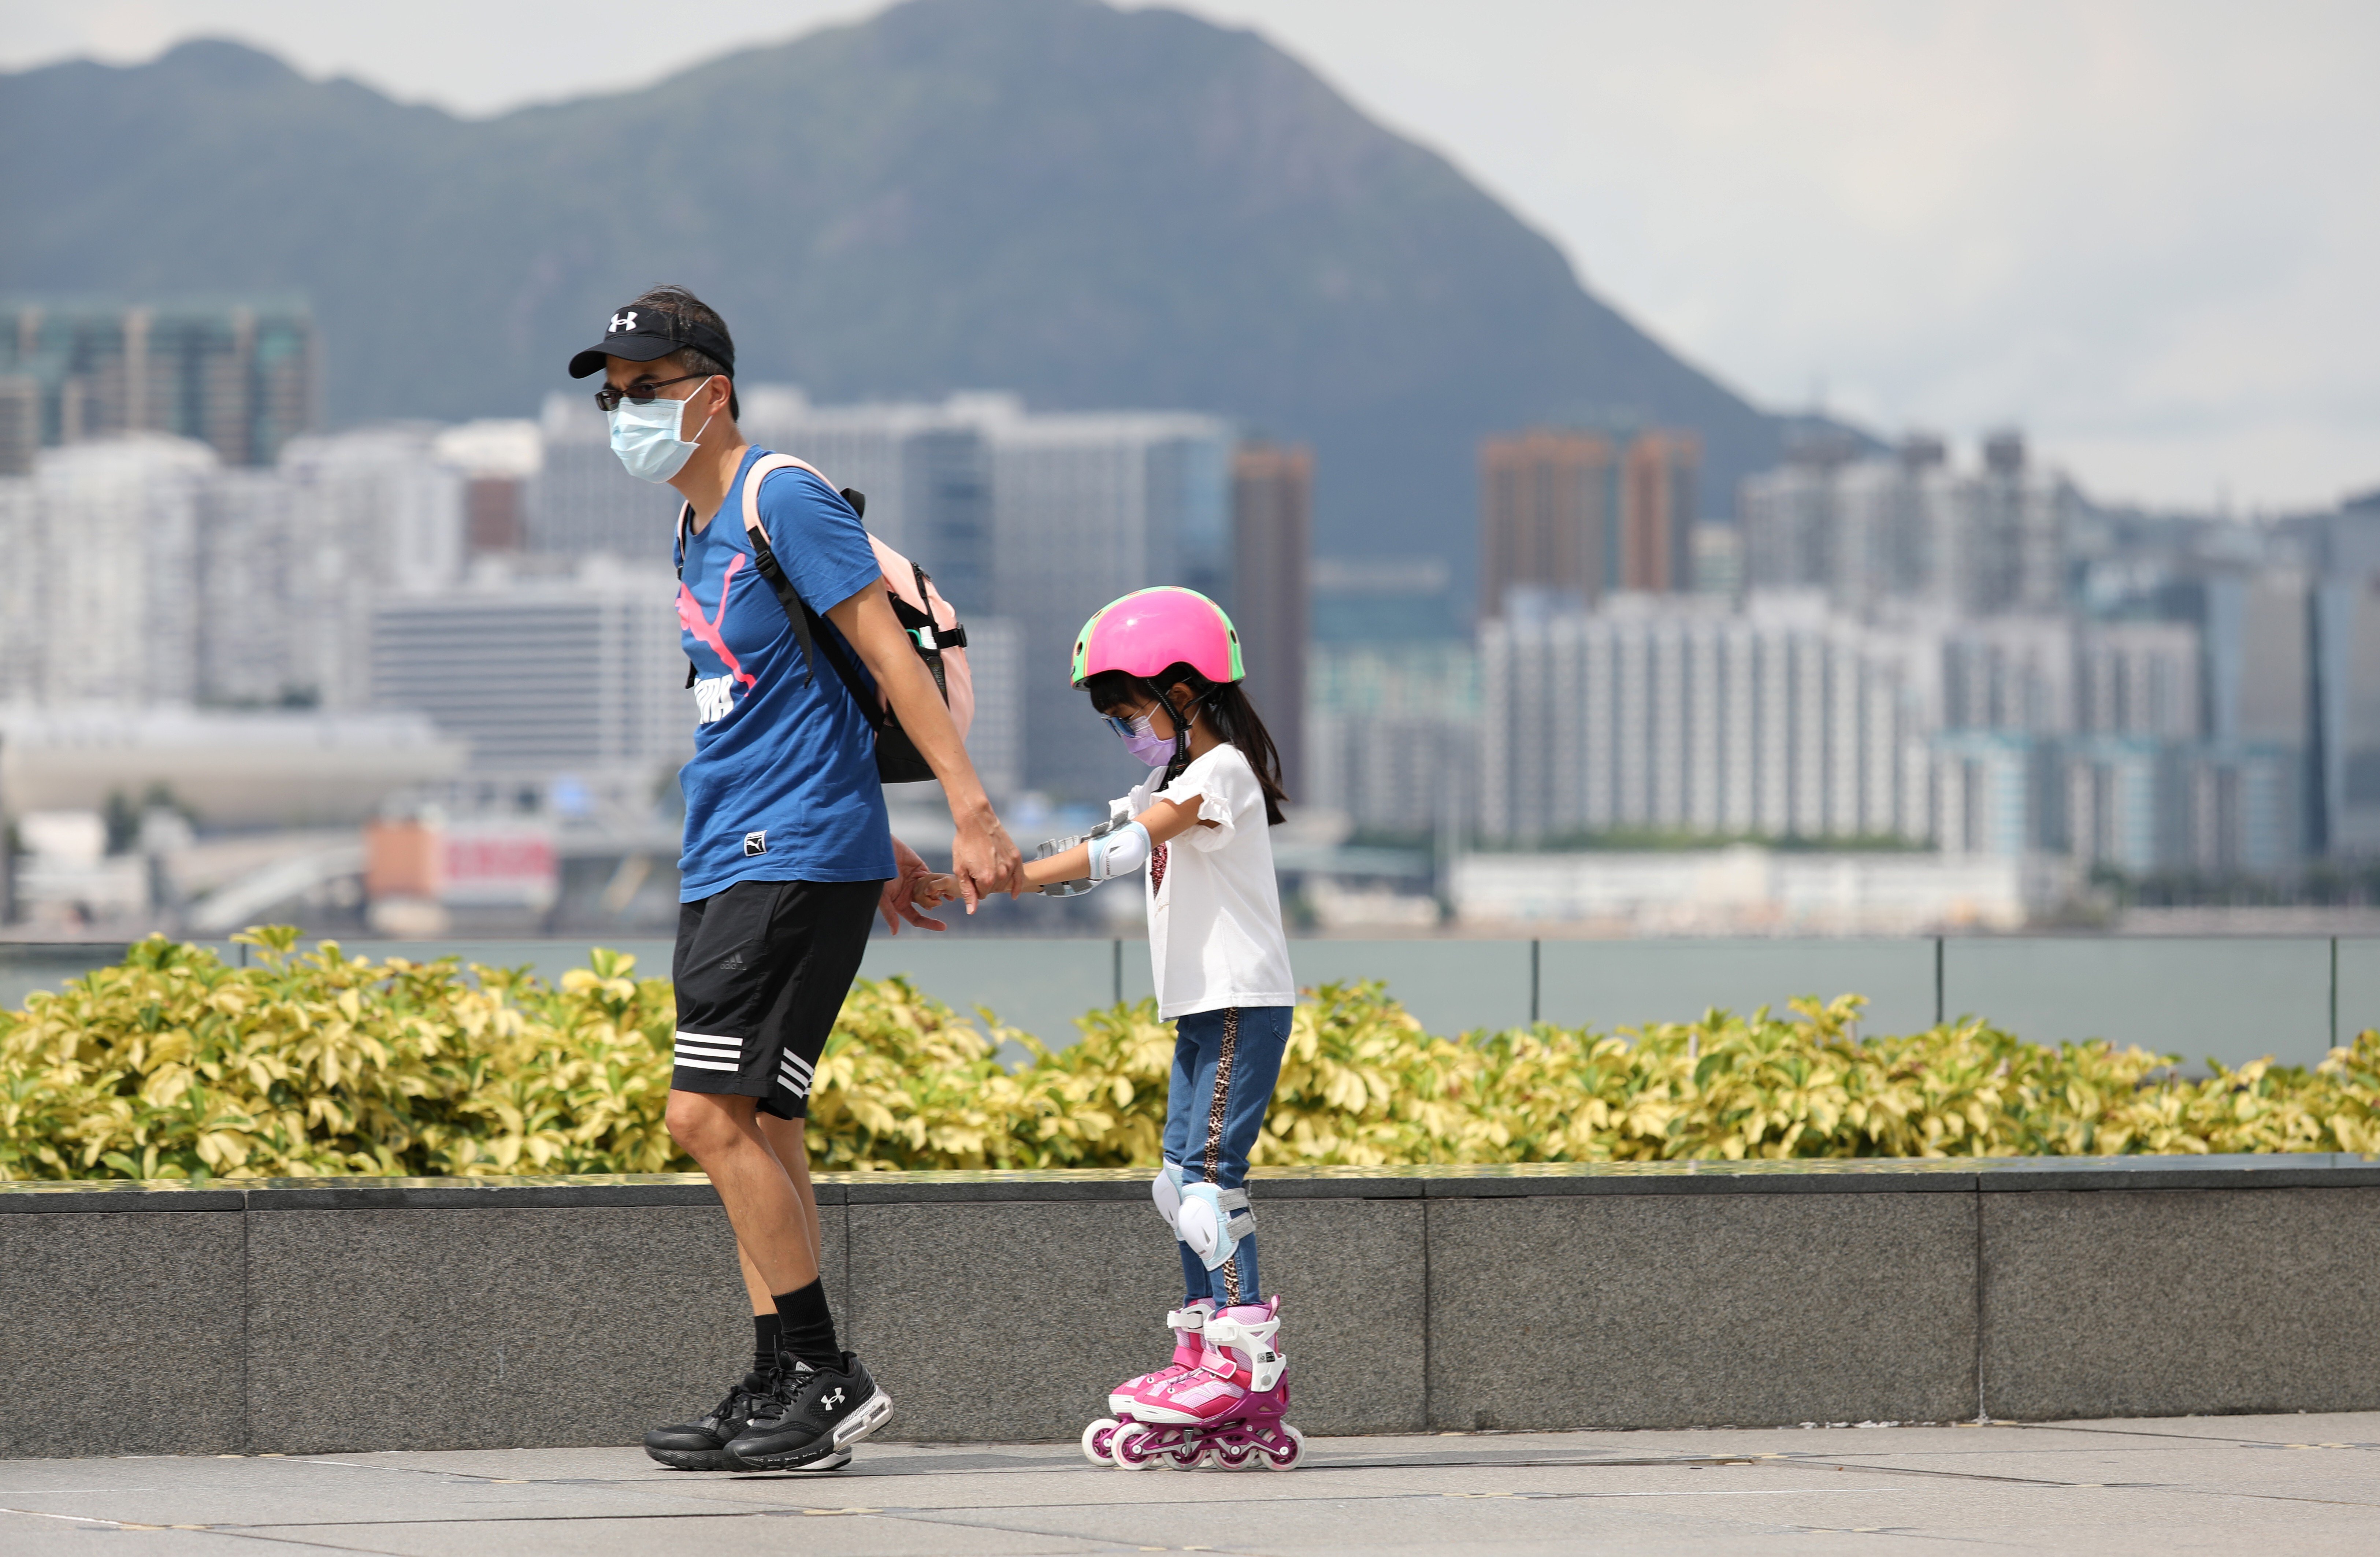 A man pulls along a girl on rollerblades at Tamar Park in Admiralty, Hong Kong, on August 10. Hong Kong has relaxed measures to contain the spread of Covid-19, but some restrictions remain. Photo: Nora Tam